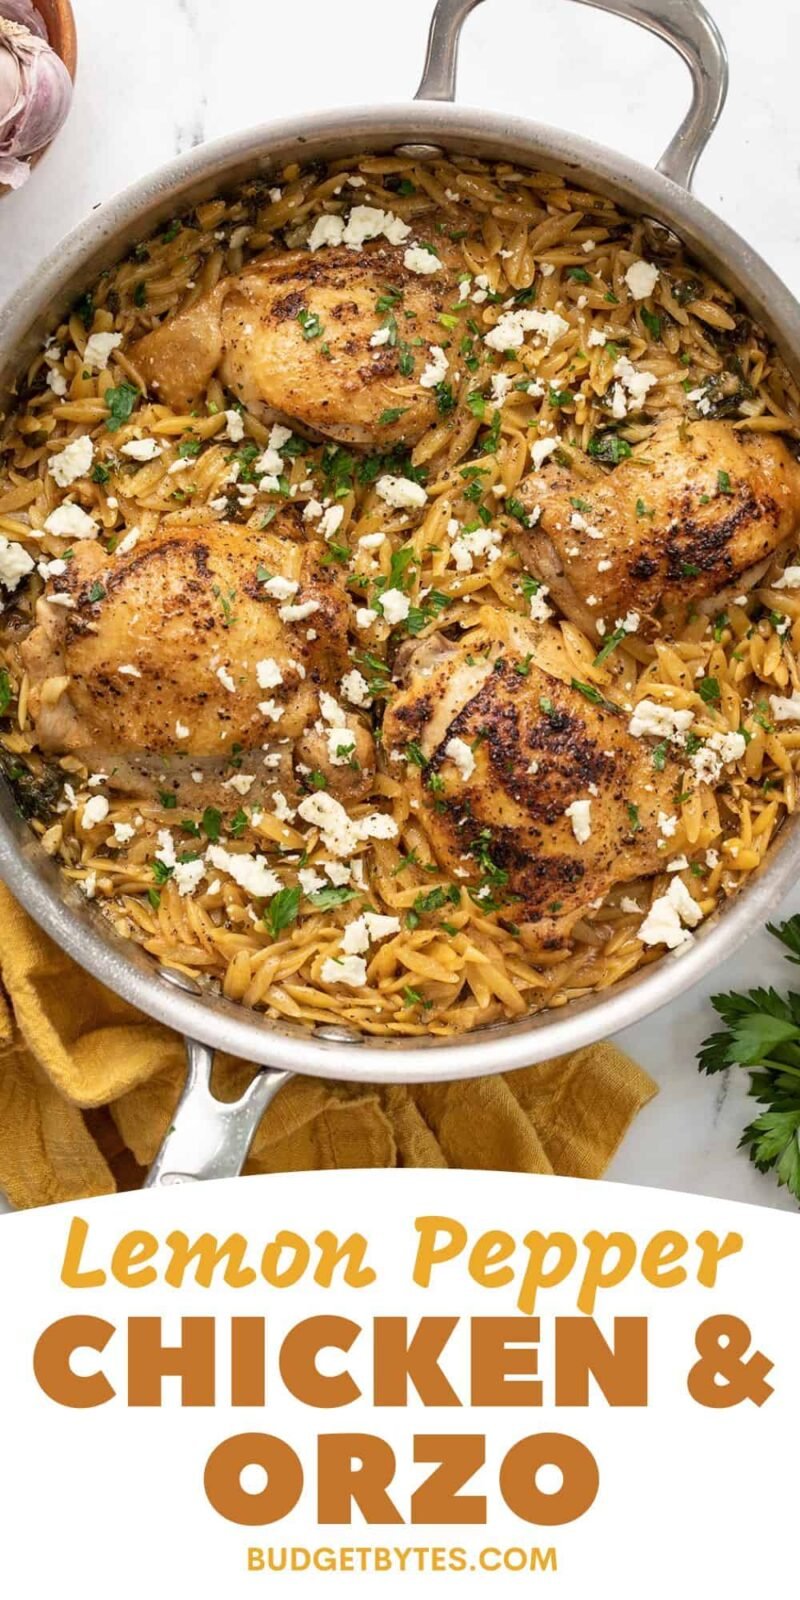 Overhead view of a skillet full of lemon pepper chicken and orzo.